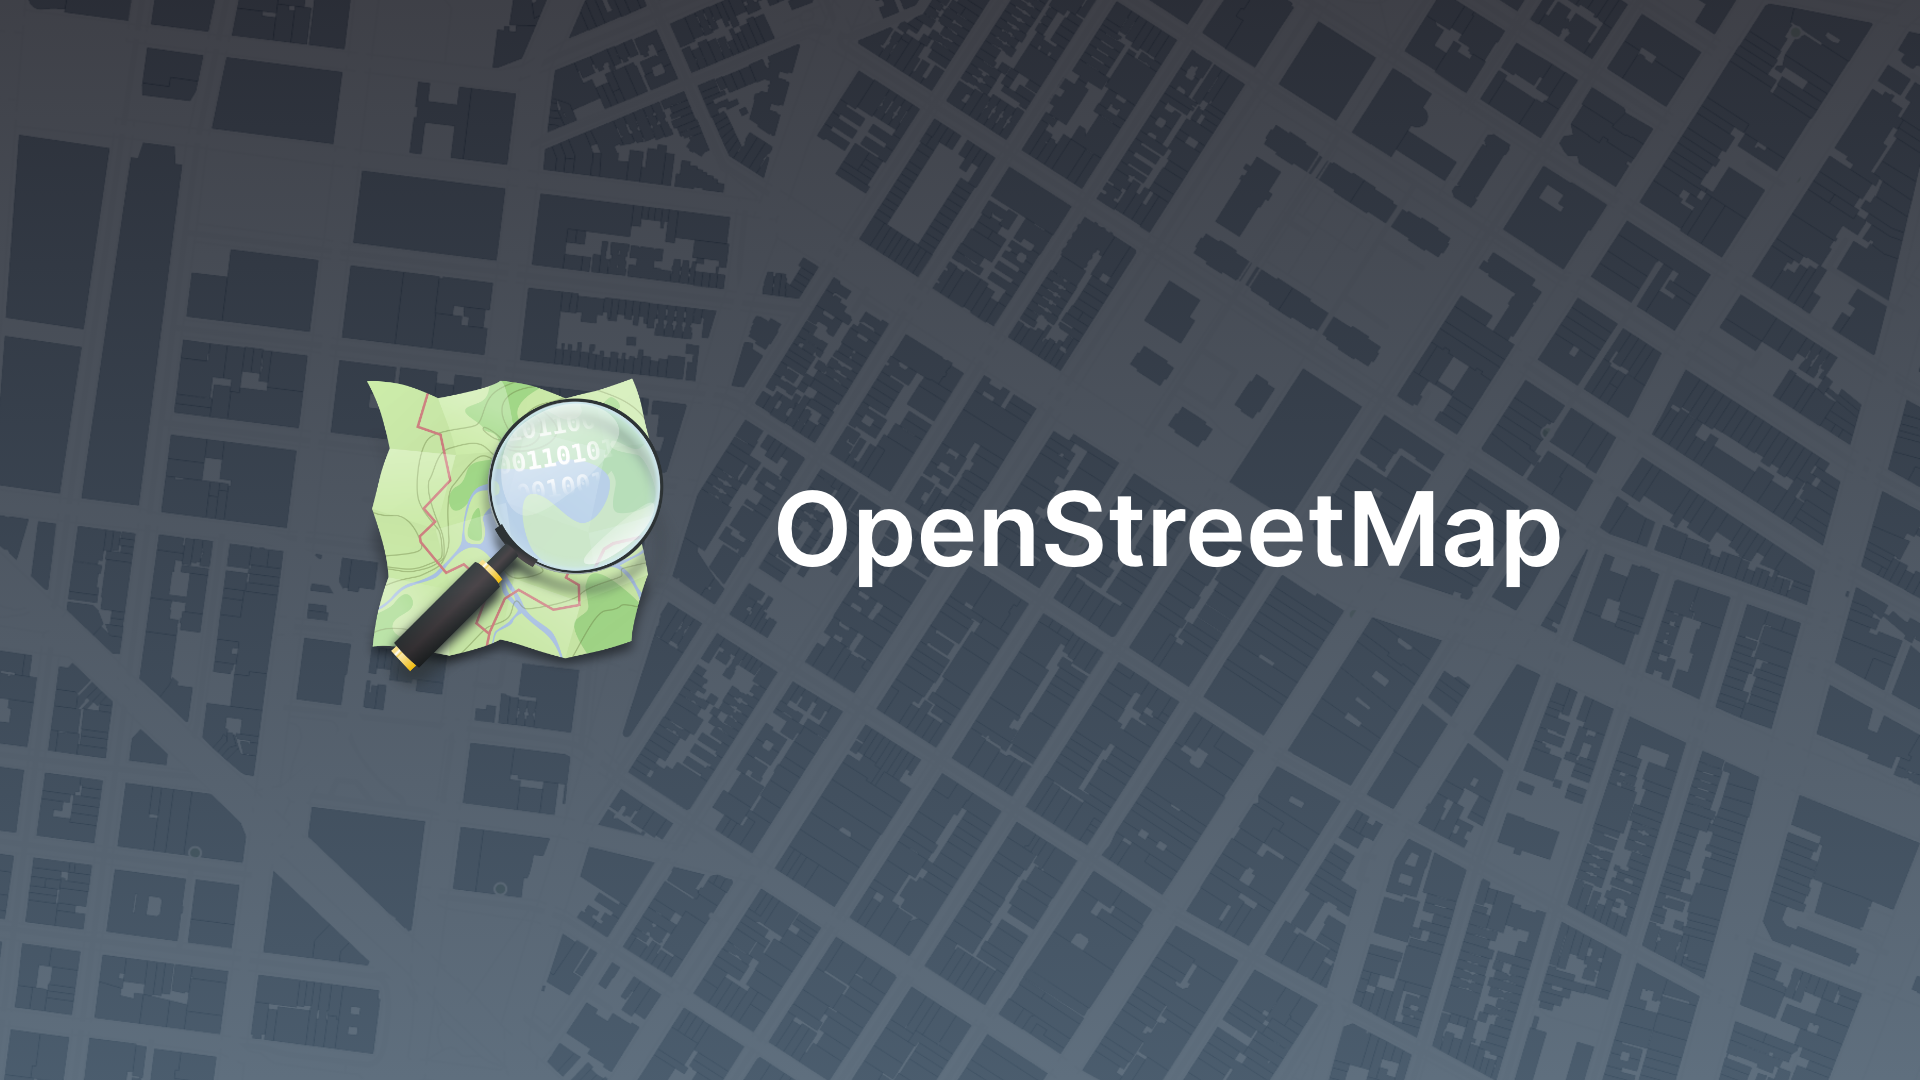 OpenStreetMap Integration: Open Data Directly in the Map